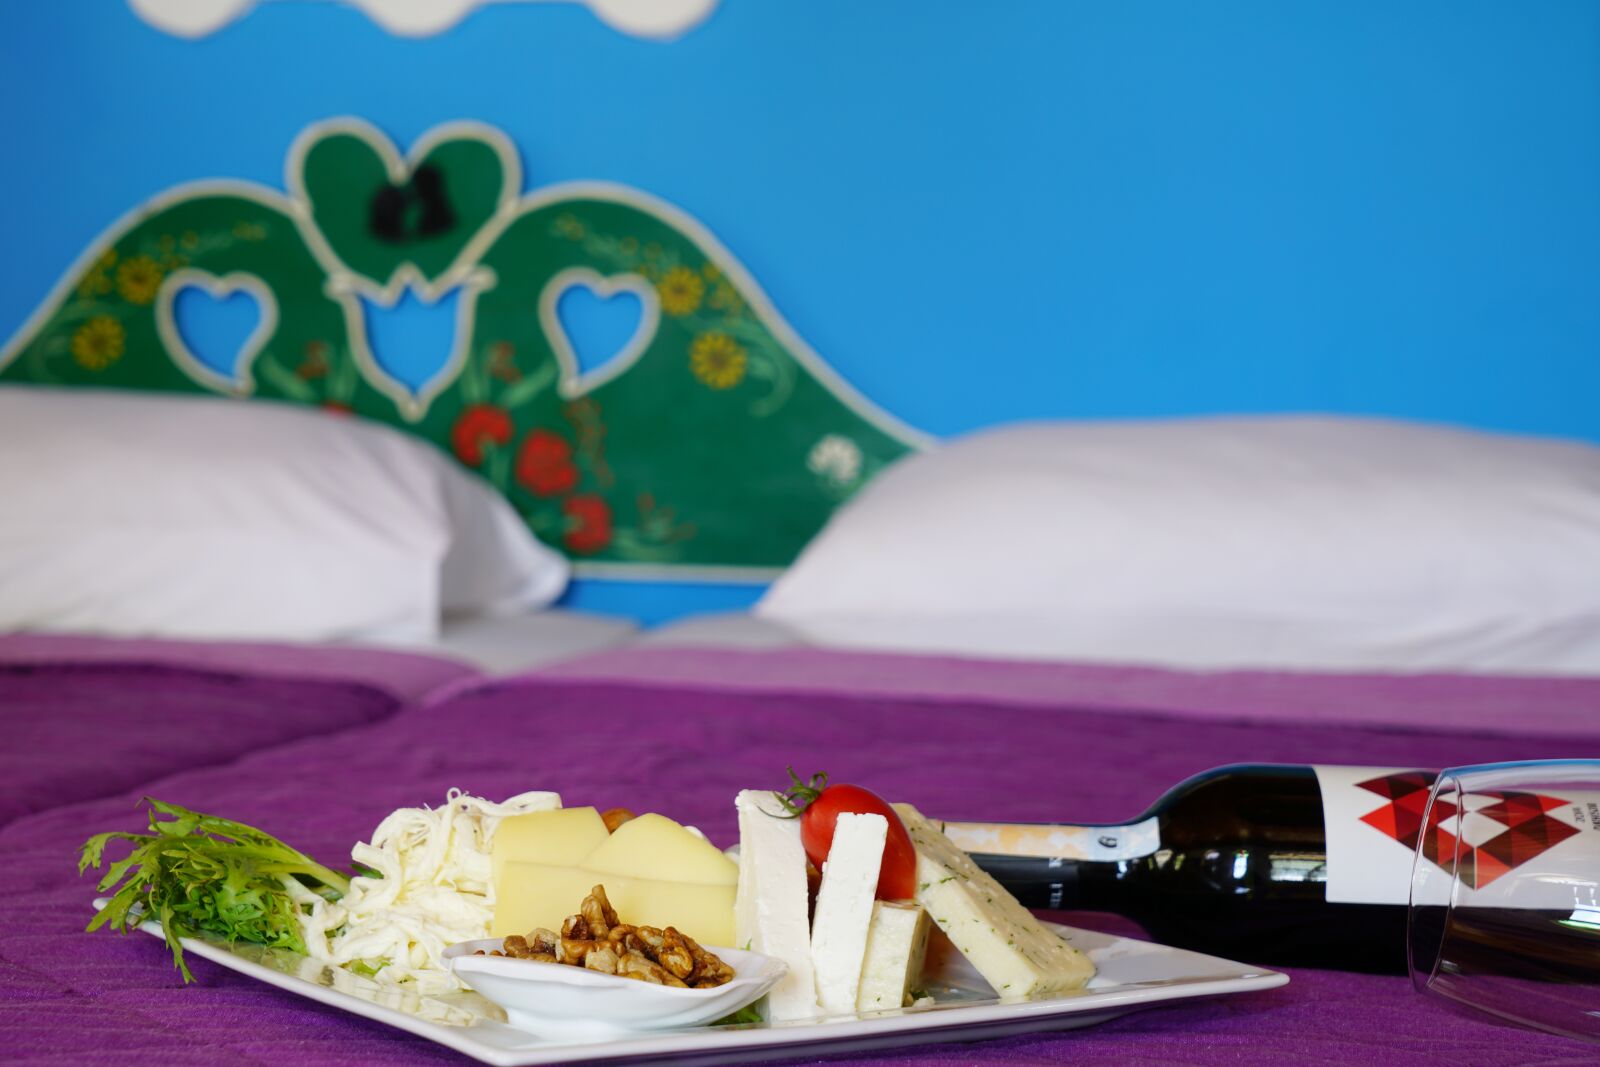 Sony a7R II sample photo. Cheese, plate, bed photography